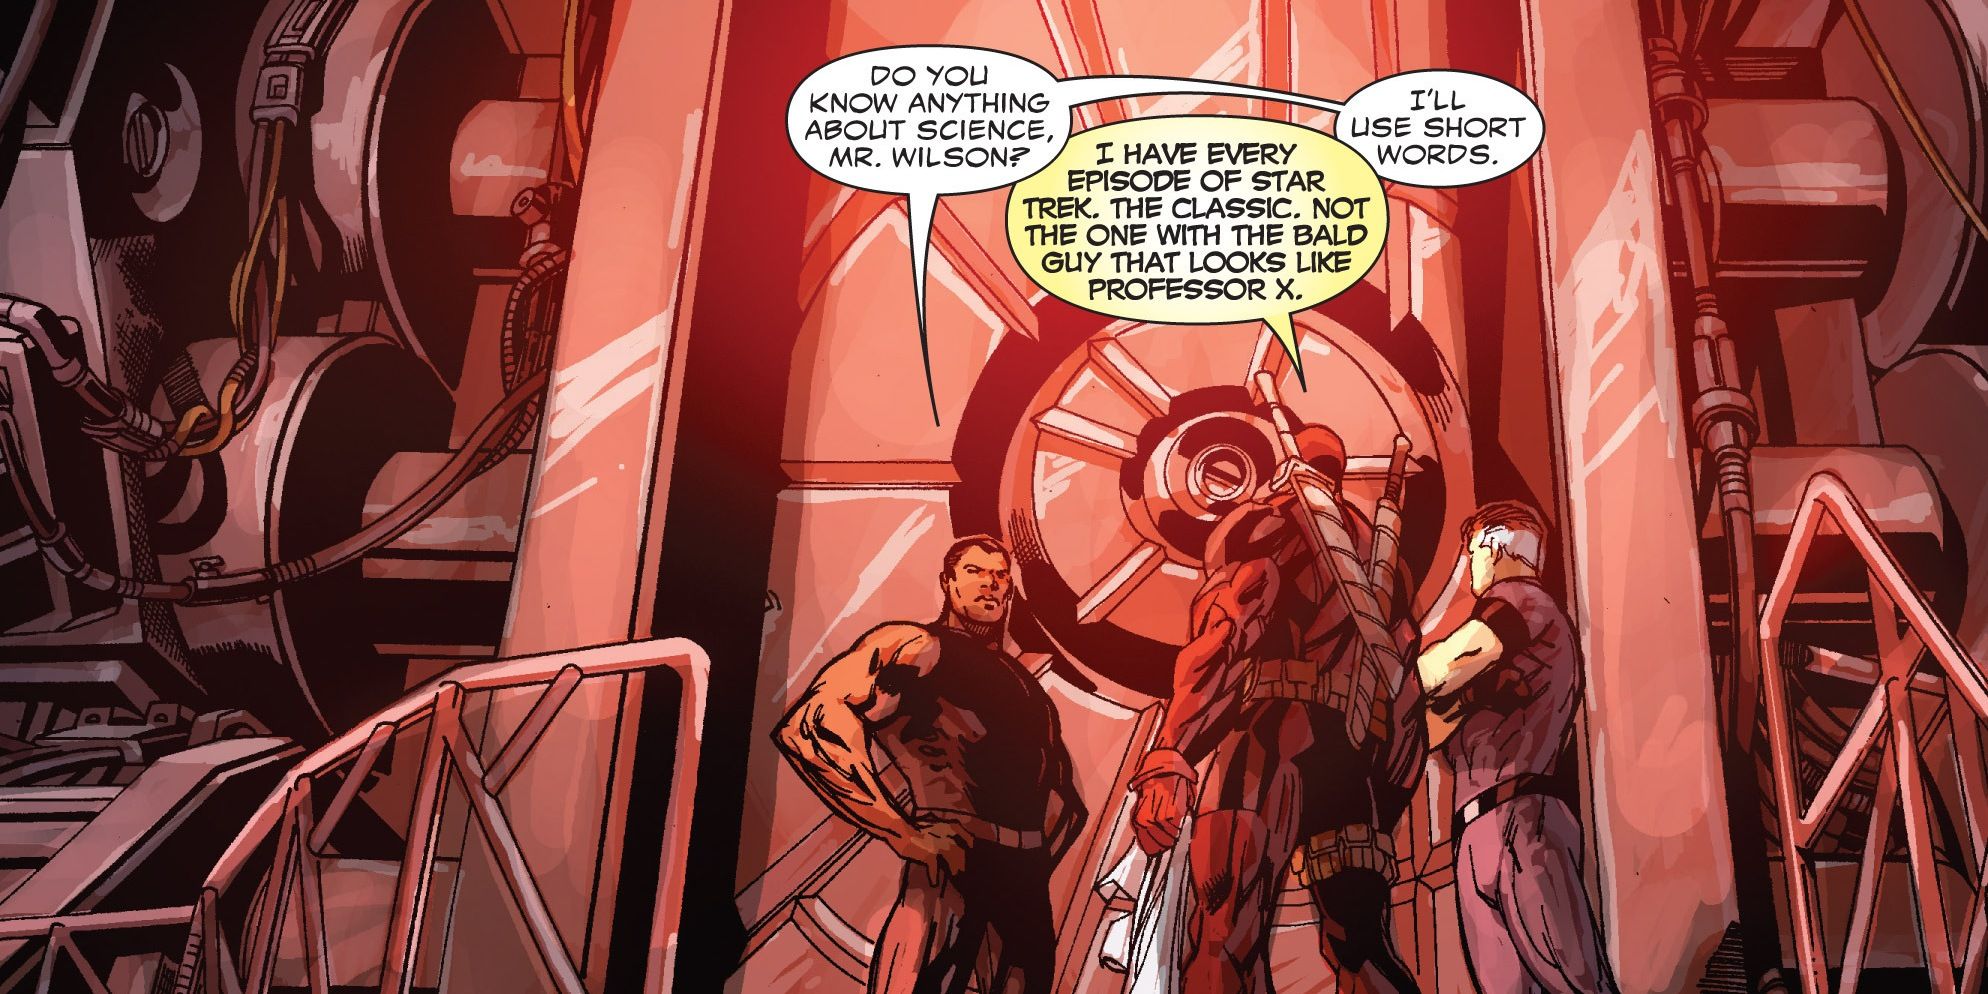 Deadpool speaks to Reed Richards and T'Challa about science and Star Trek.